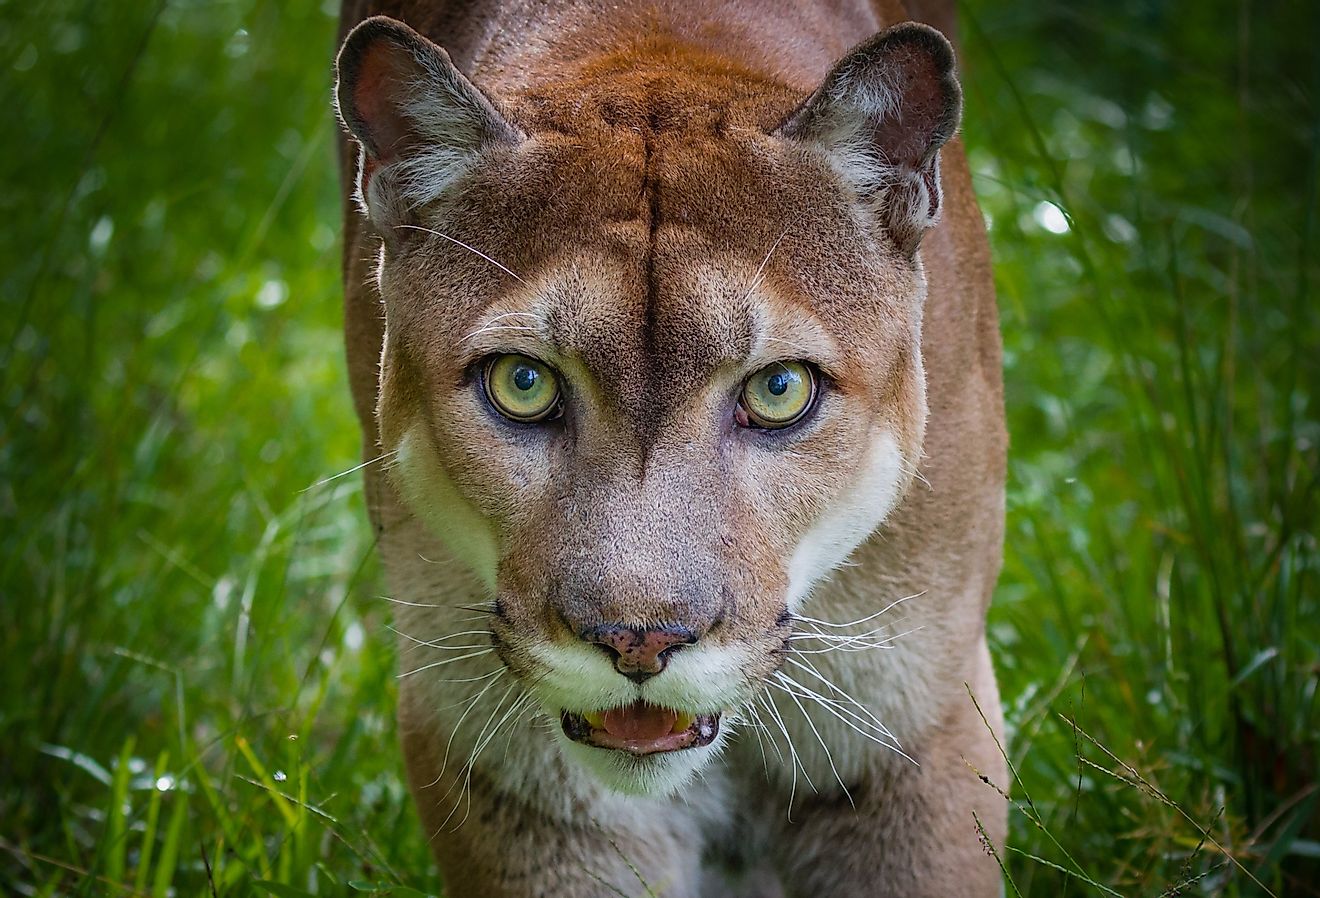 Close up of a Florida panther, the state animal.